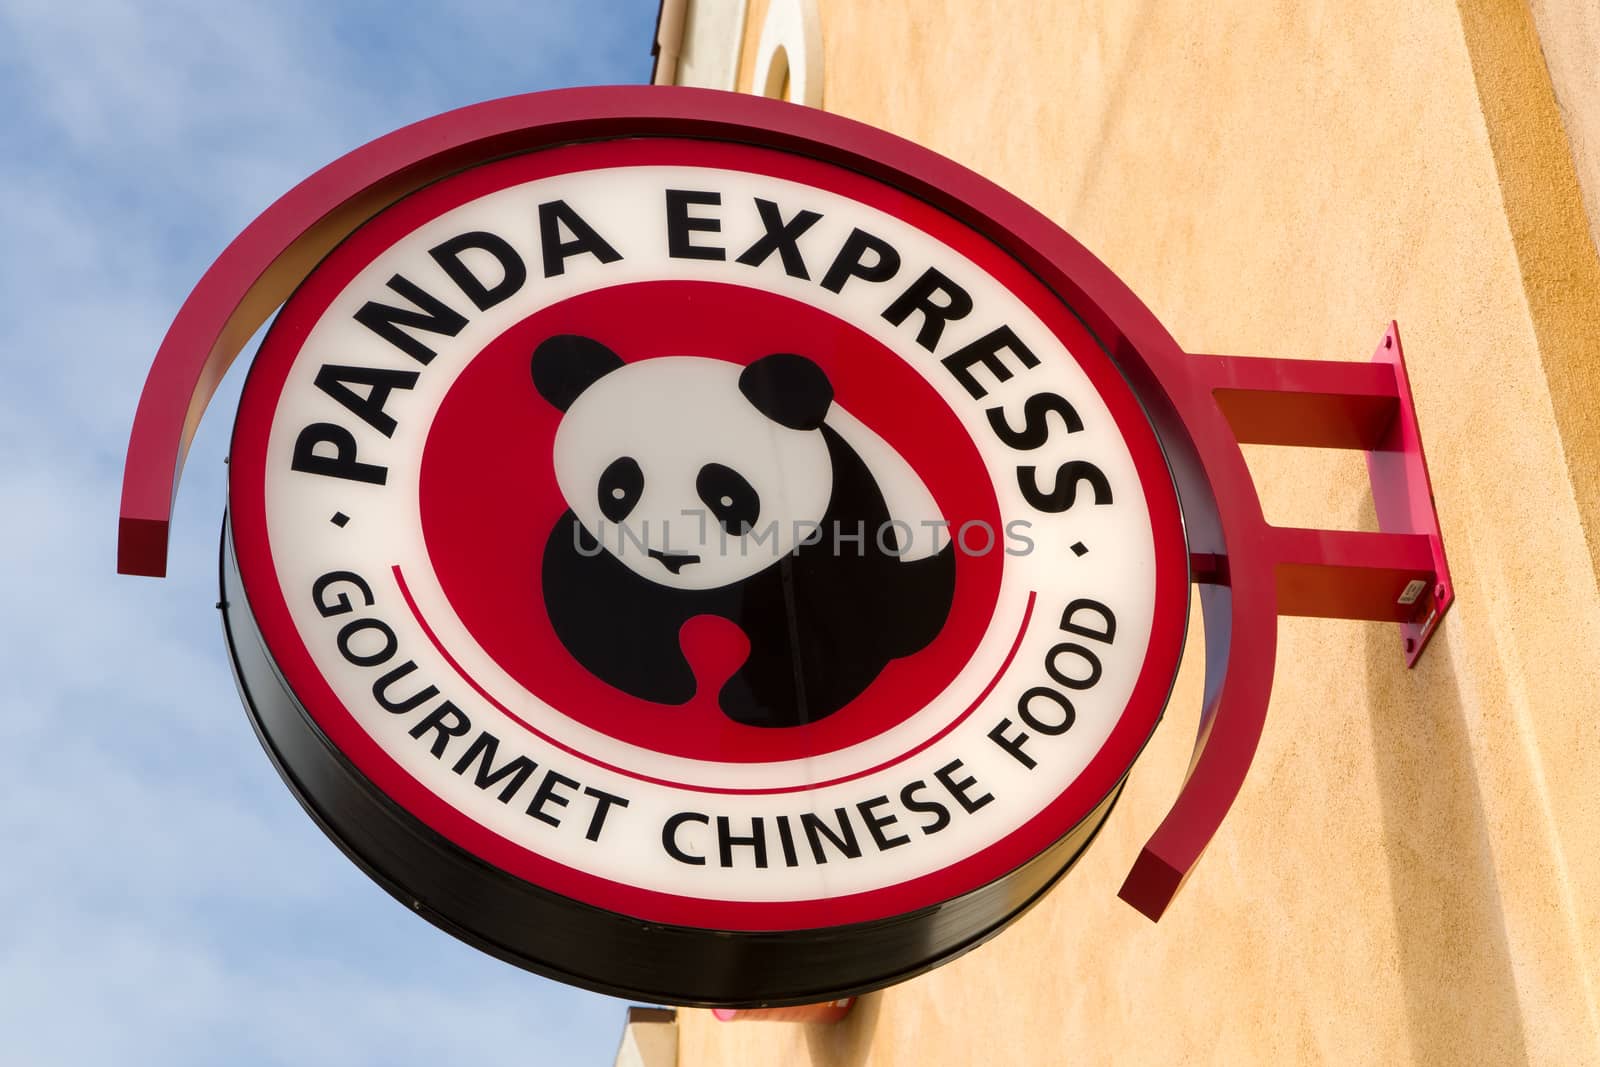 SUNLAND, CA/USA - JANUARY 9, 2016: Panda Express restaurant exterior and logo. Panda Express is a fast casual restaurant chain which serves American Chinese cuisine.